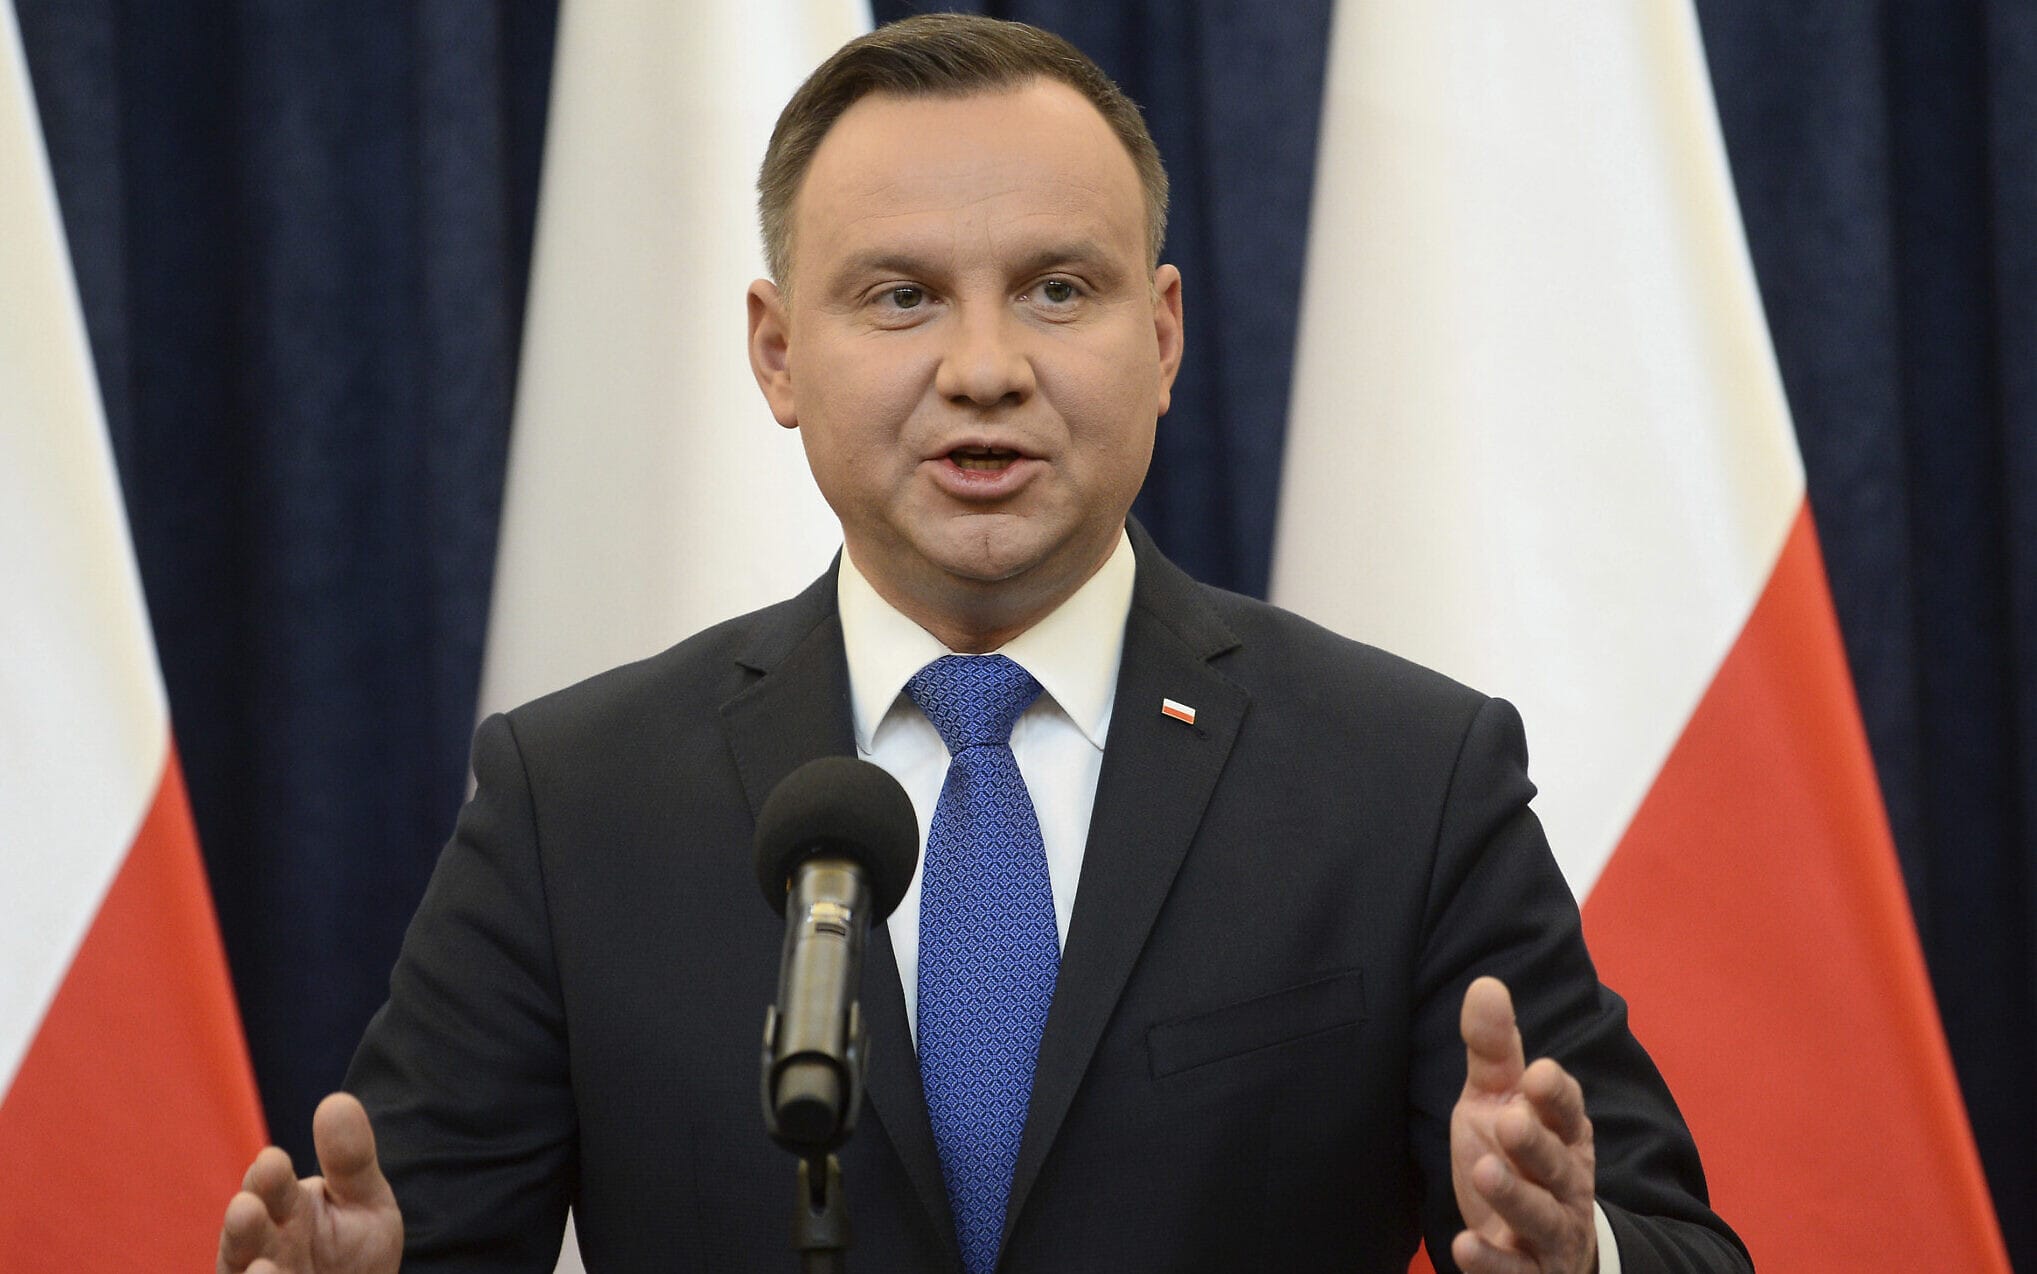 President Duda's comments on Crimea's return get him in trouble (Credits: The Times of Israel)